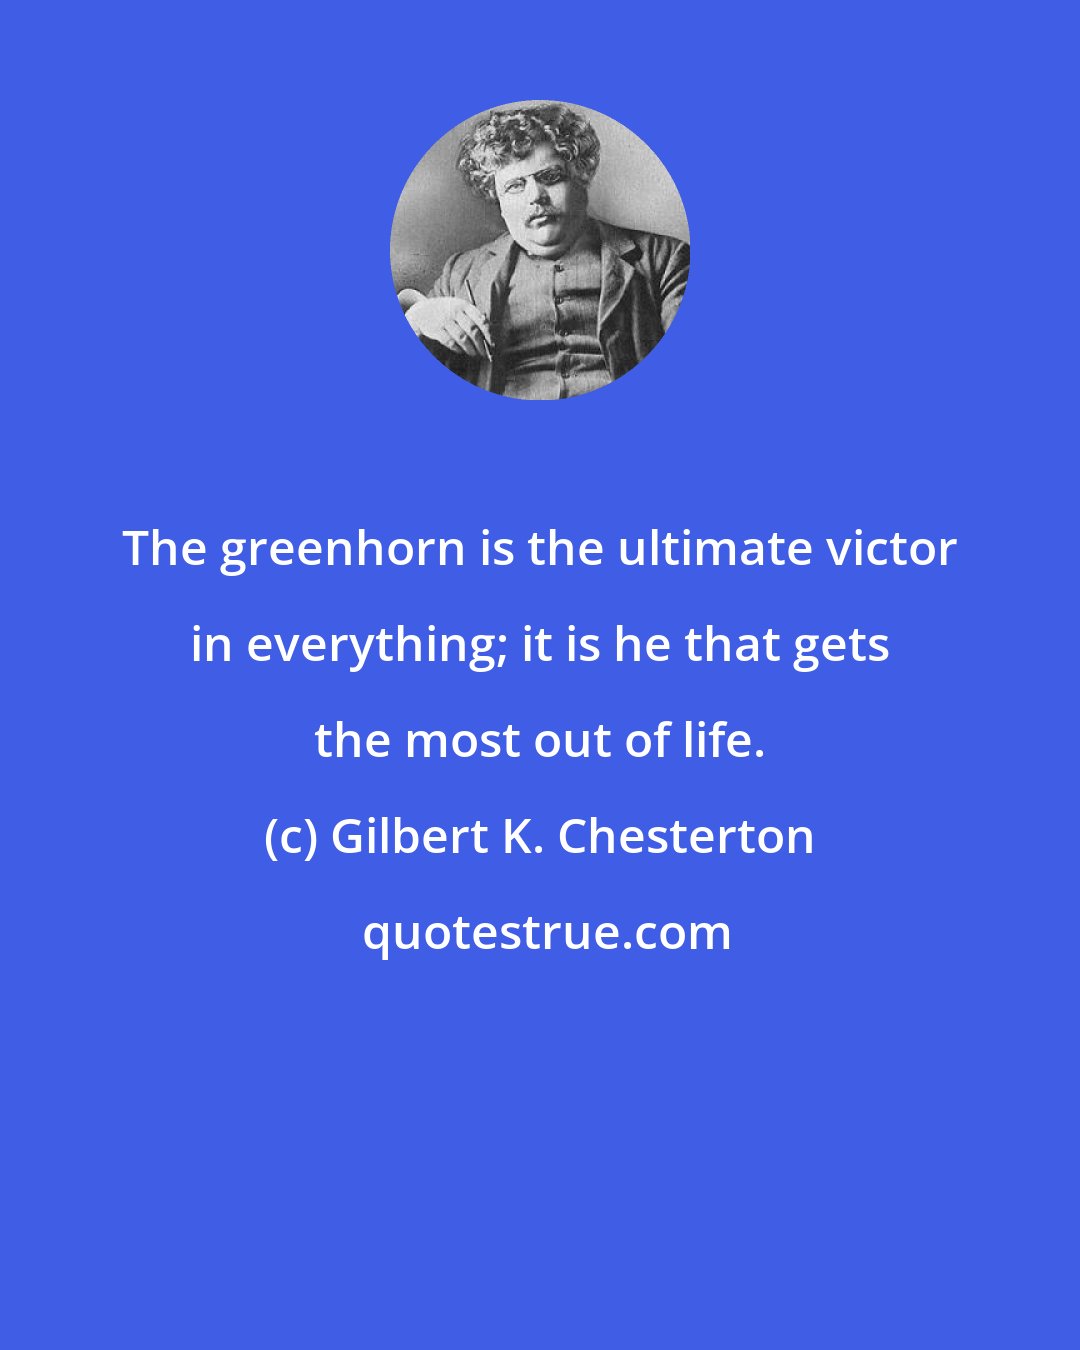 Gilbert K. Chesterton: The greenhorn is the ultimate victor in everything; it is he that gets the most out of life.